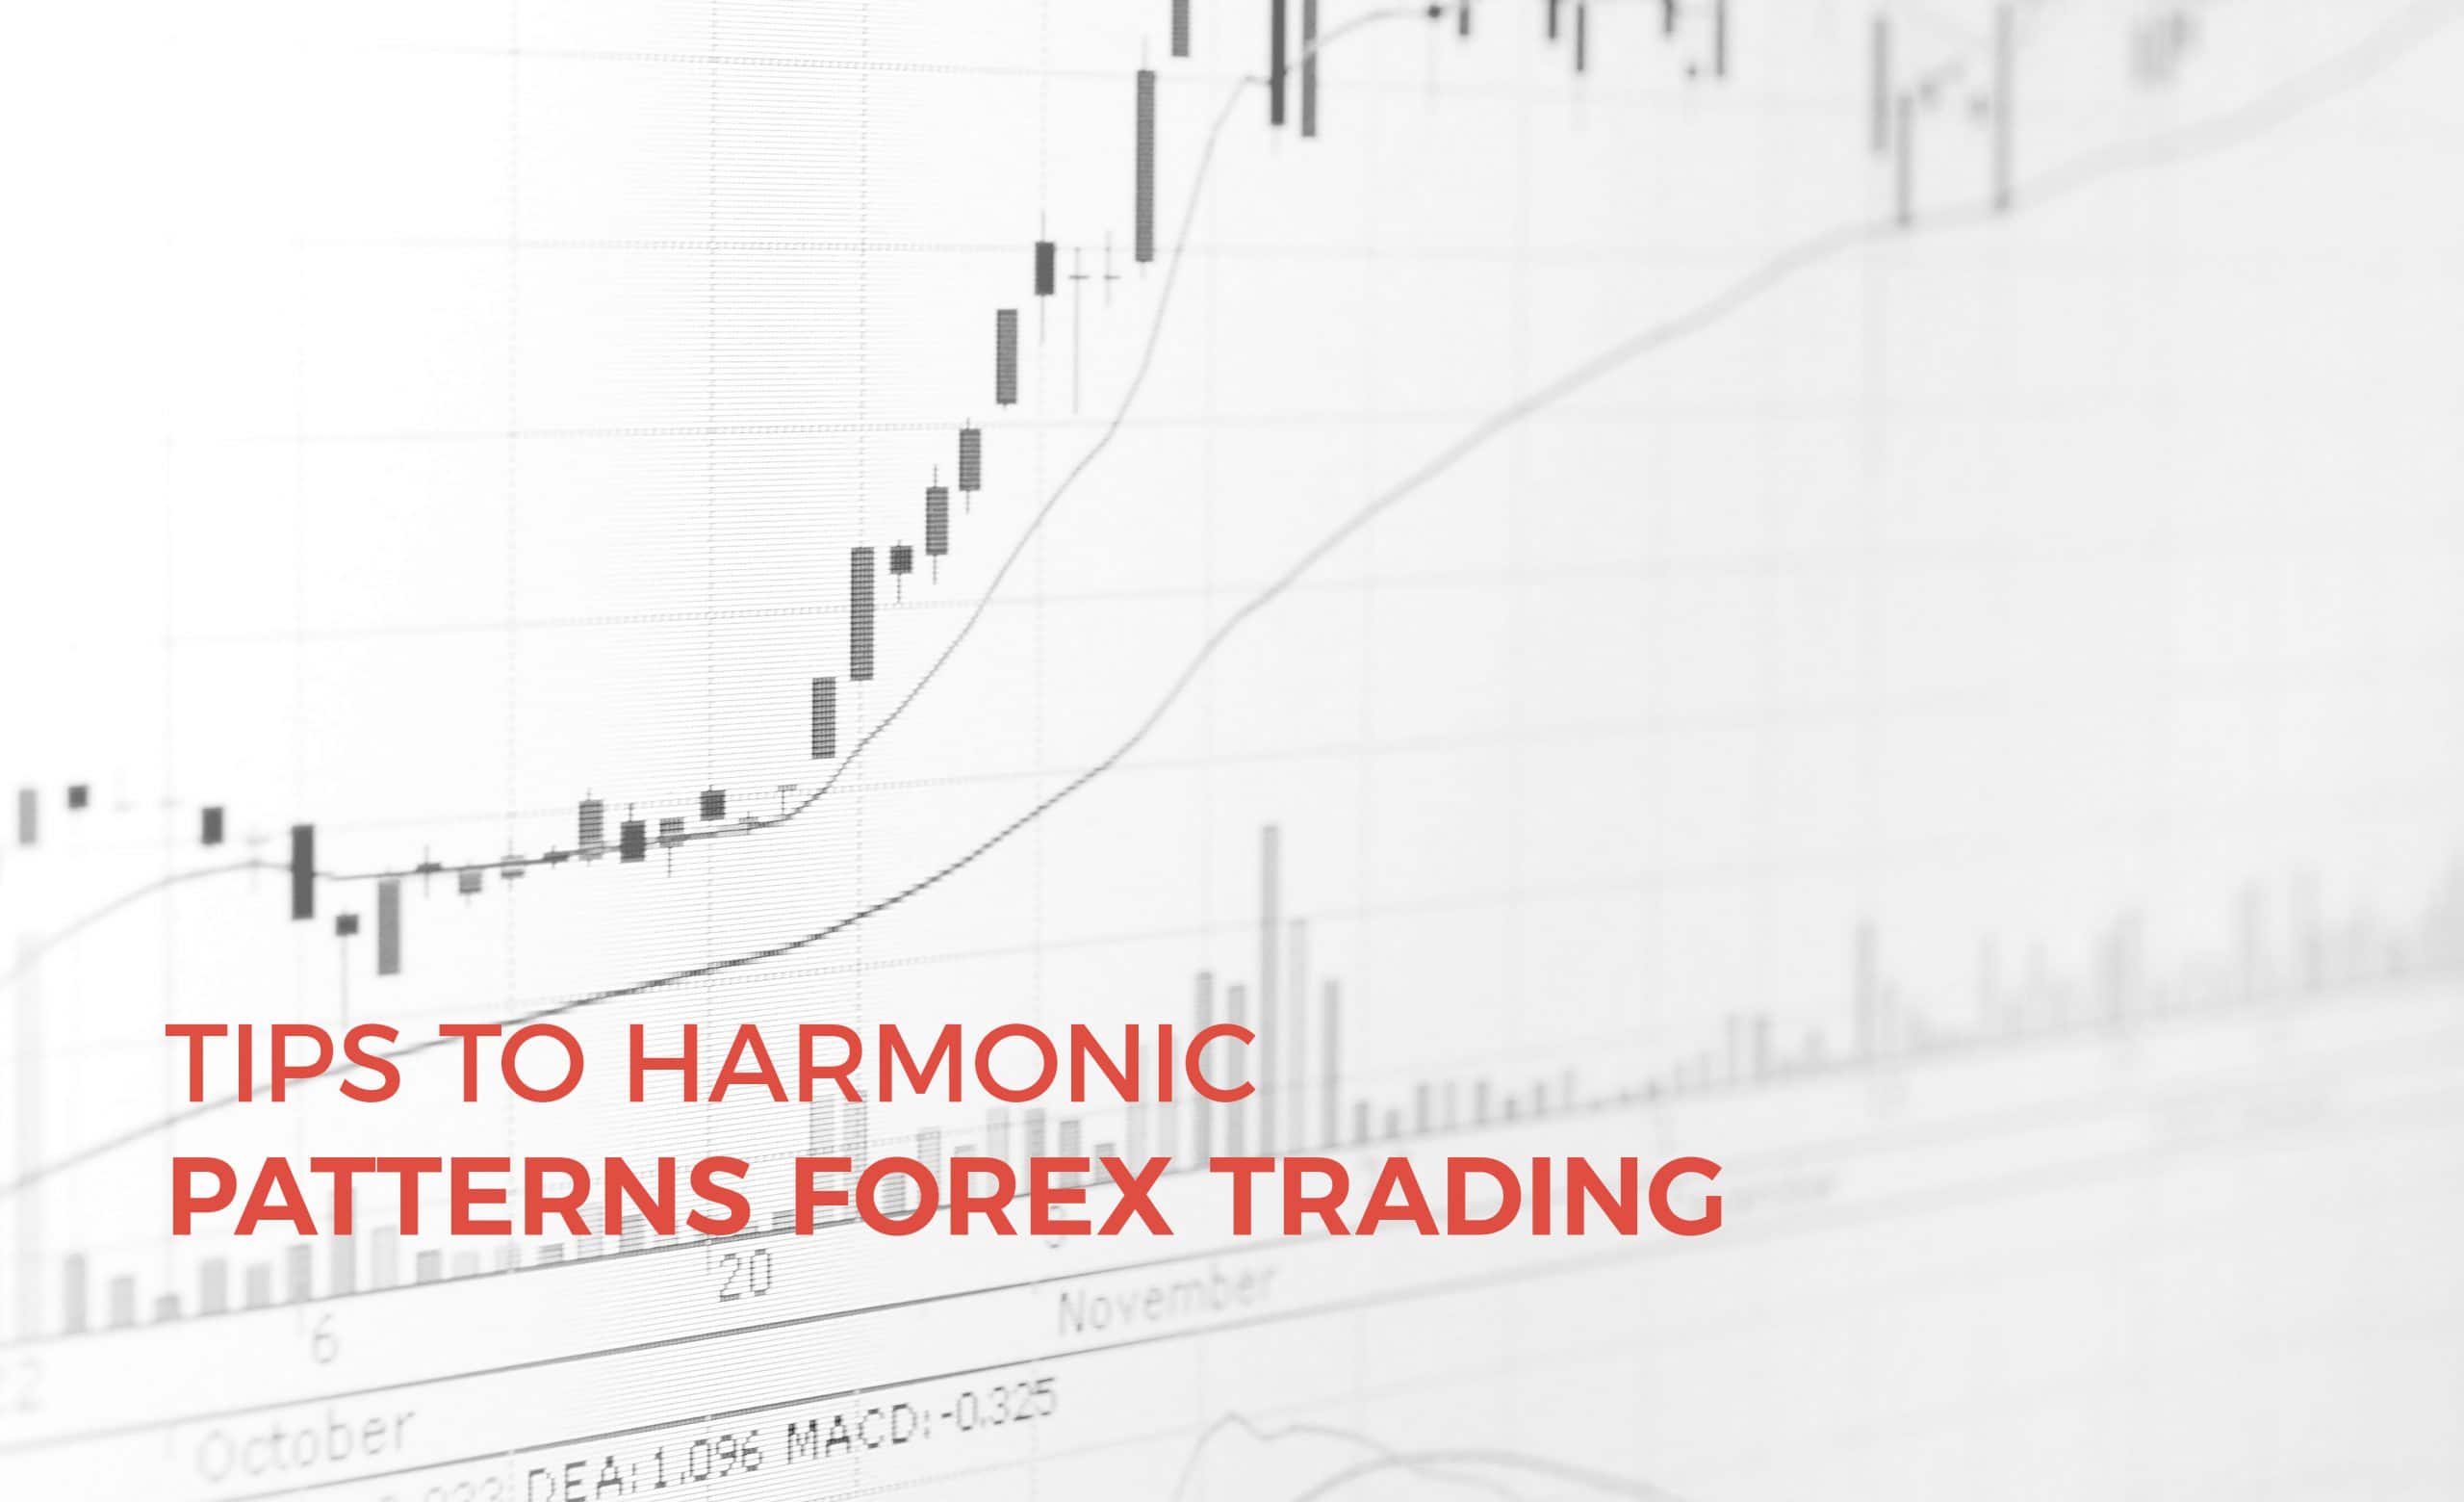 Harmonic patterns in forex trading